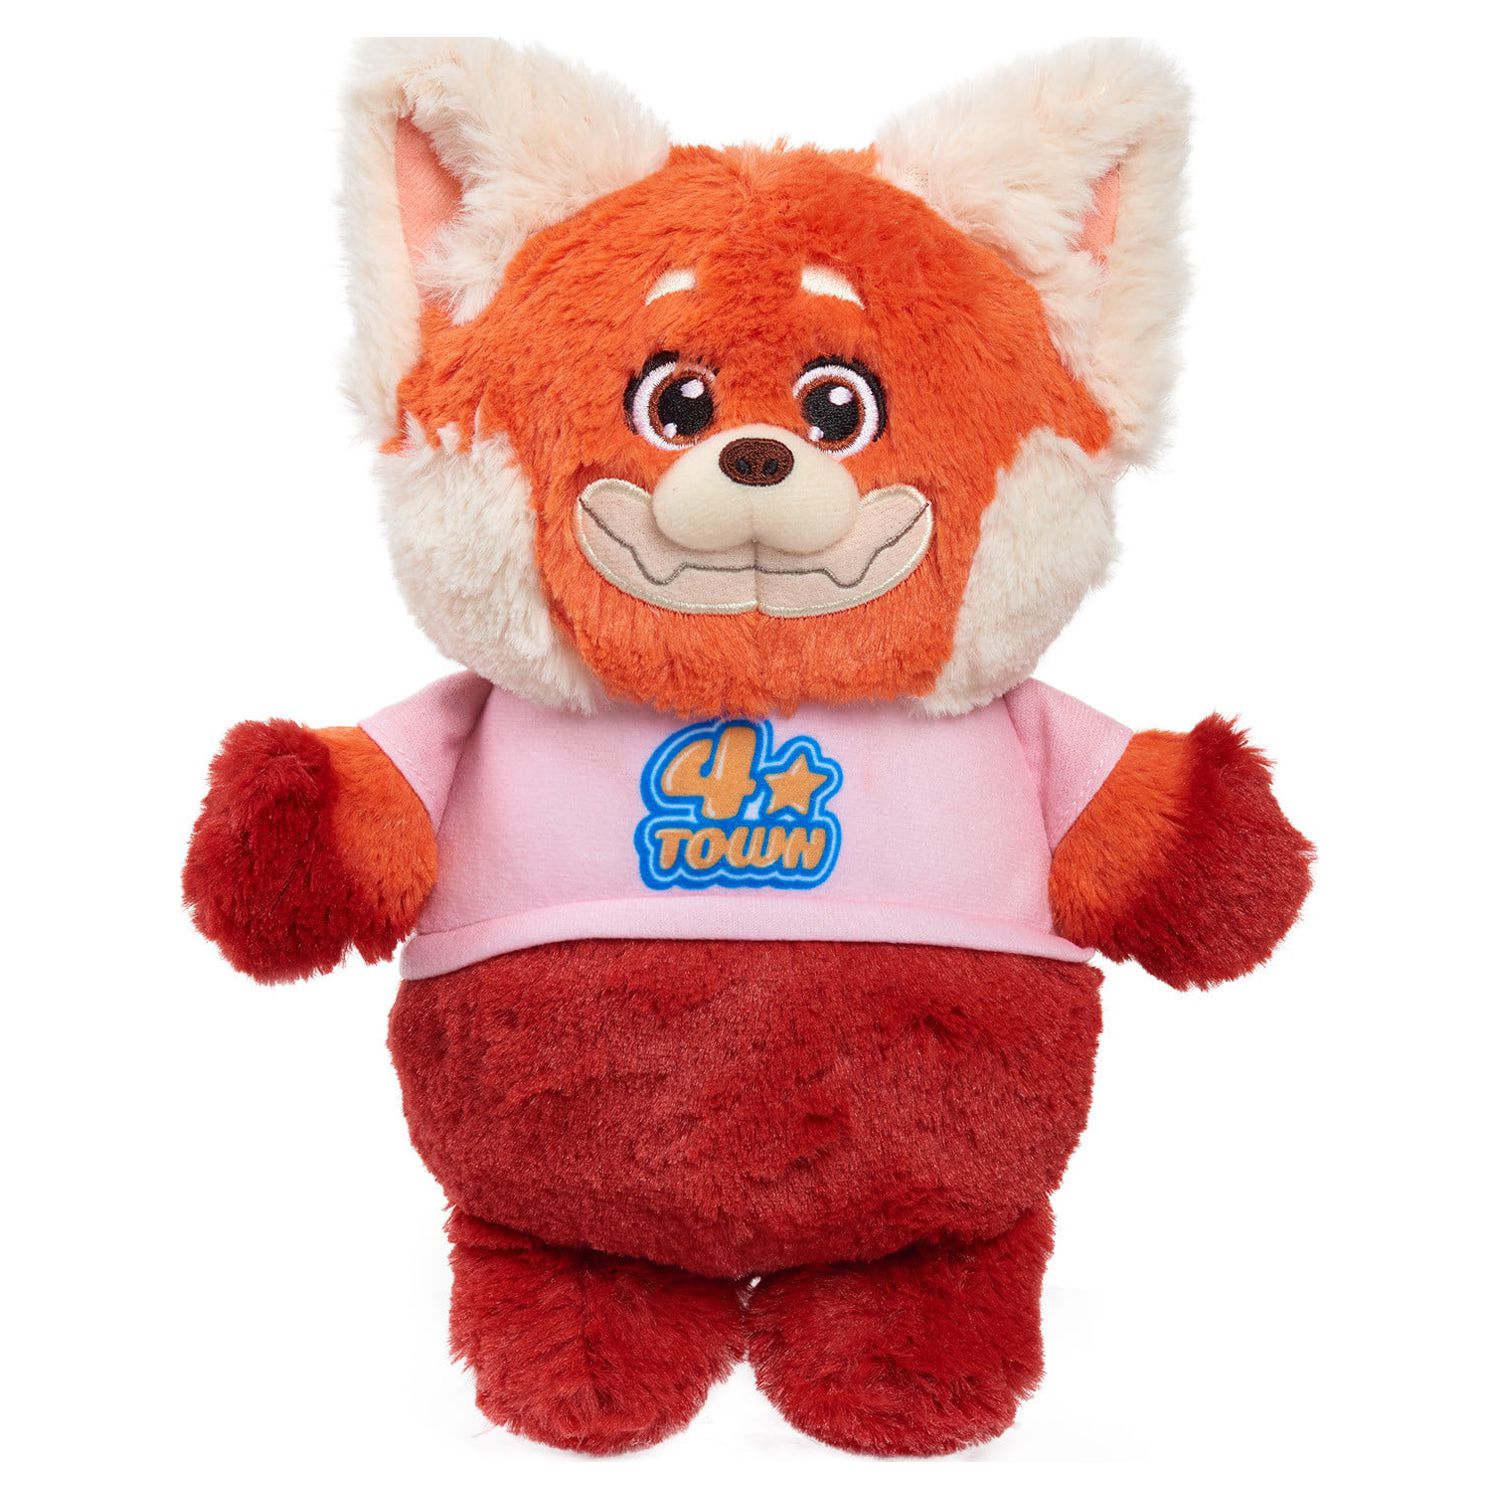 Disney and Pixar Turning Red – Red Panda Mei 11-inch Concert Plush with Lights and Sounds, Officially Licensed Kids Toys for Ages 3 Up, Gifts and Presents - image 3 of 8